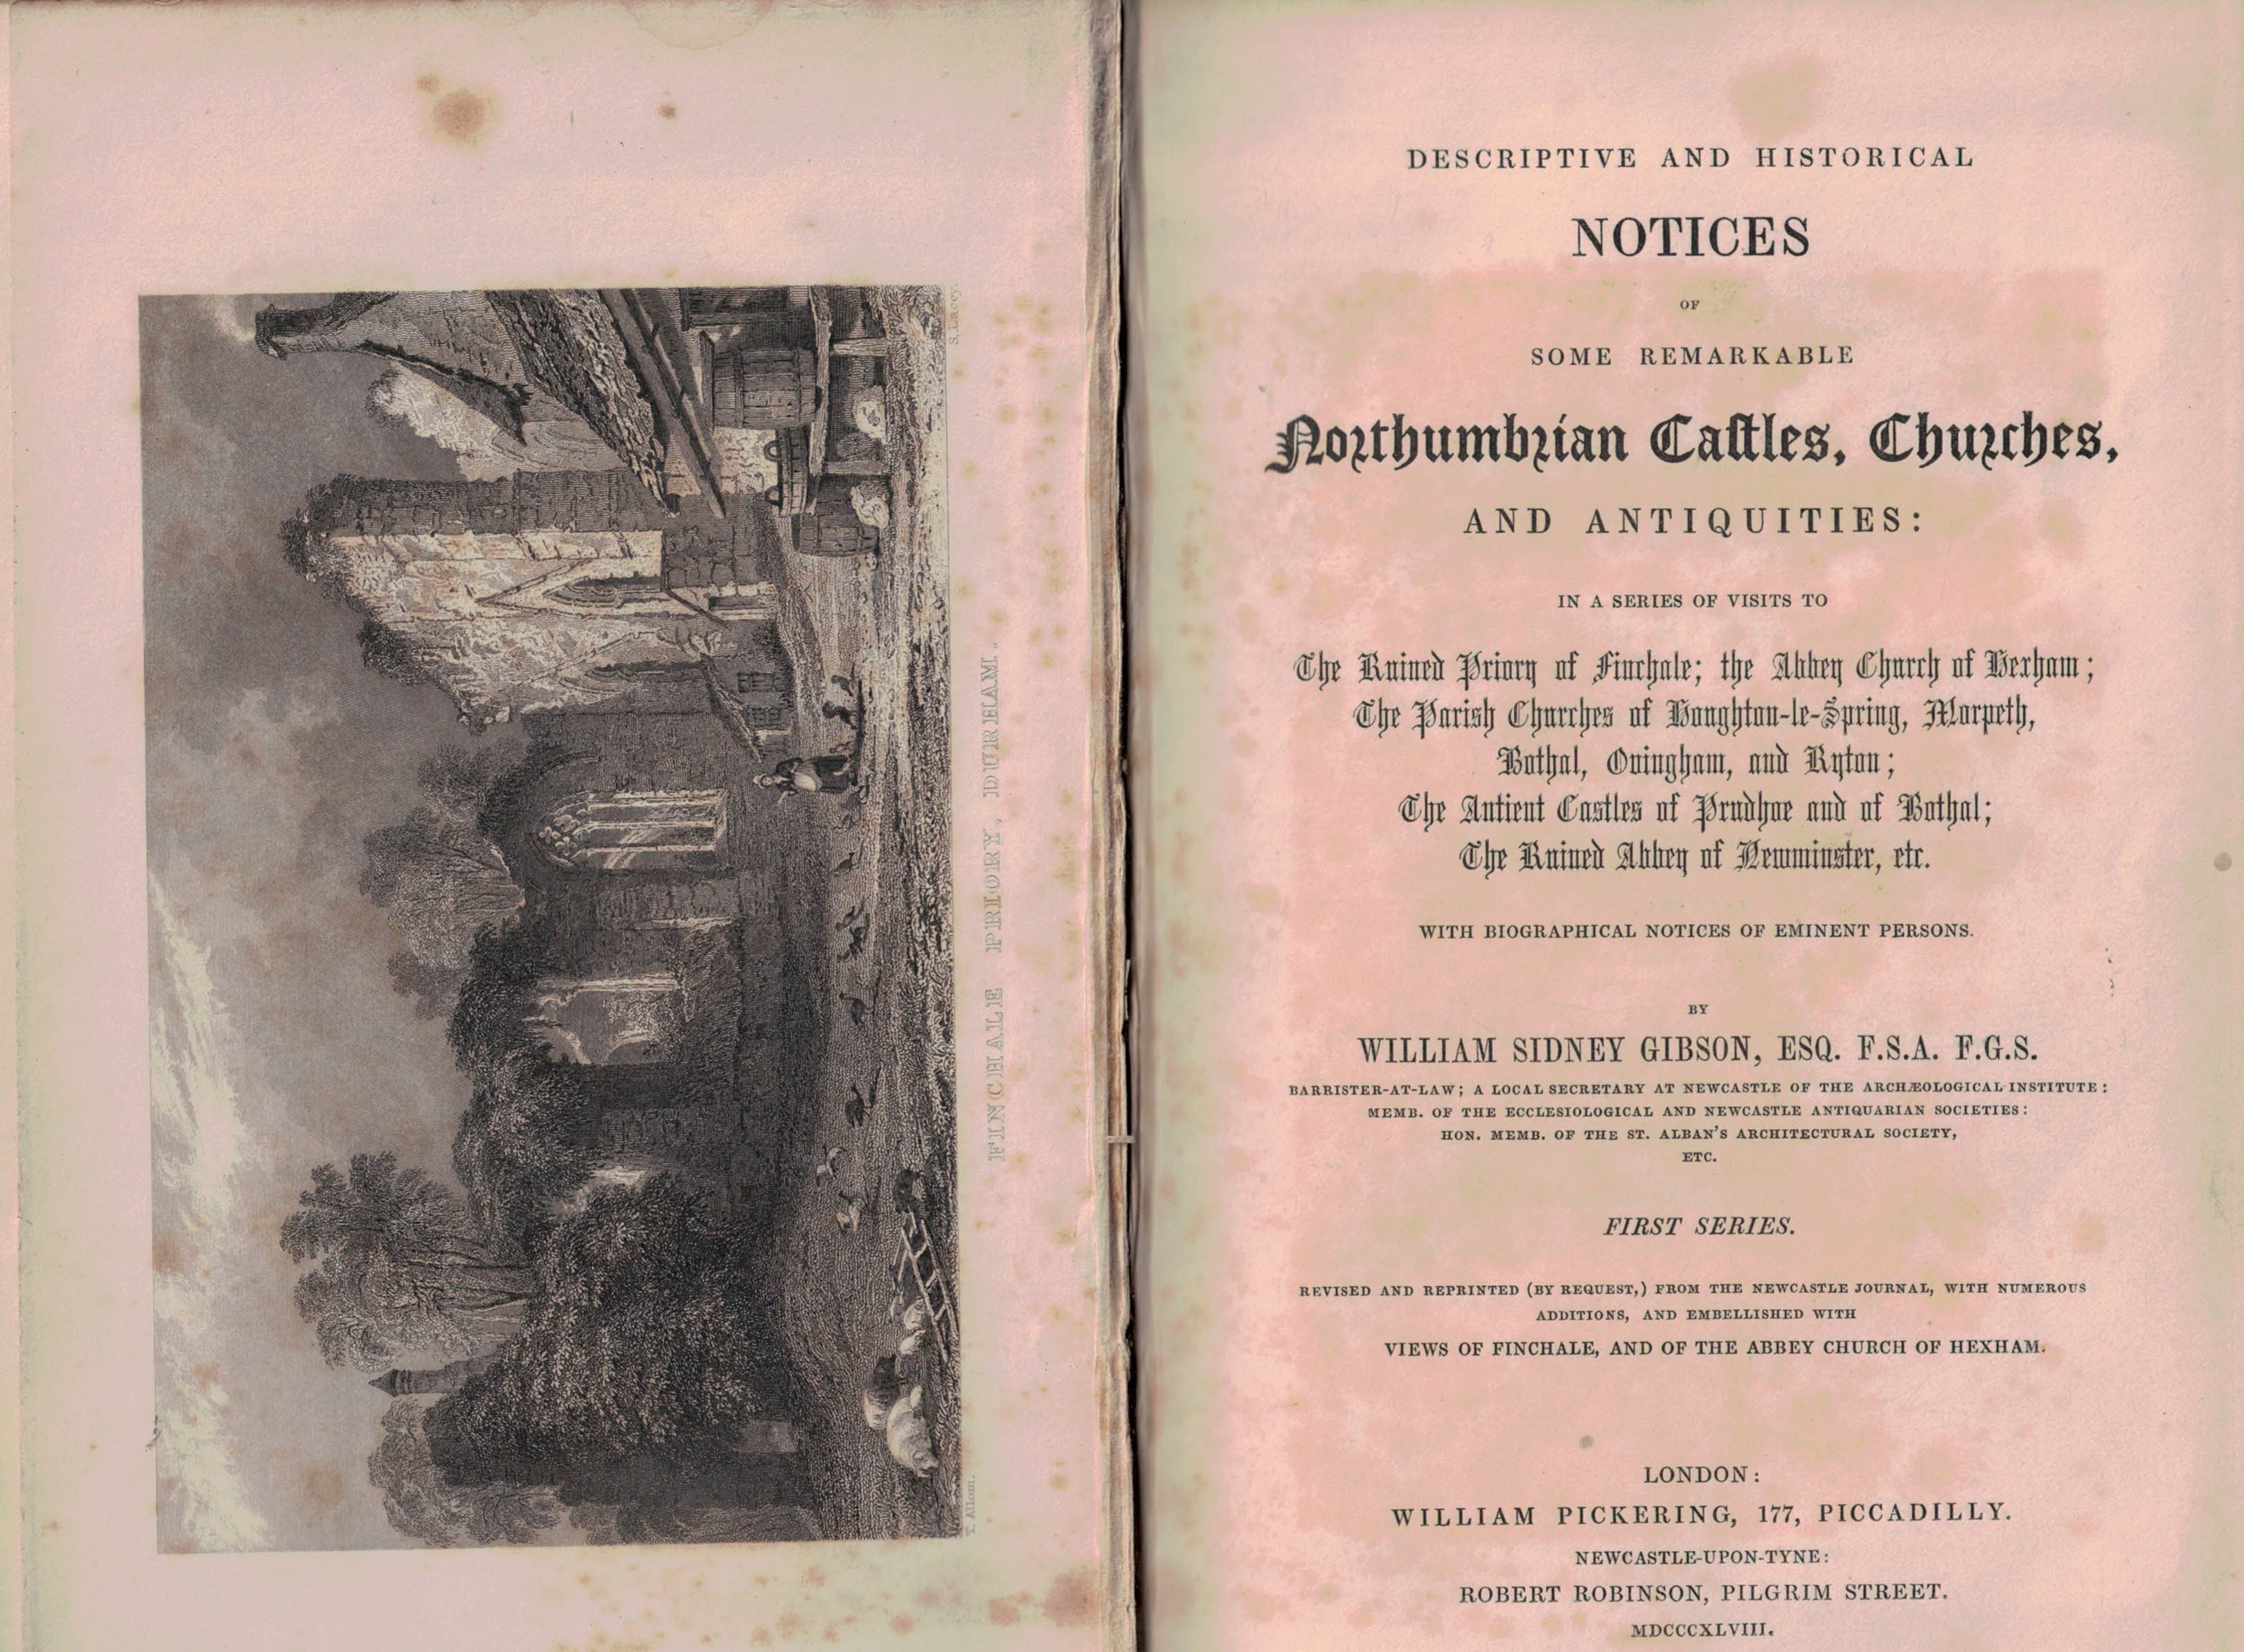 Descriptive and Historical Notices of Northumbrian Castles, Churches and Antiquities